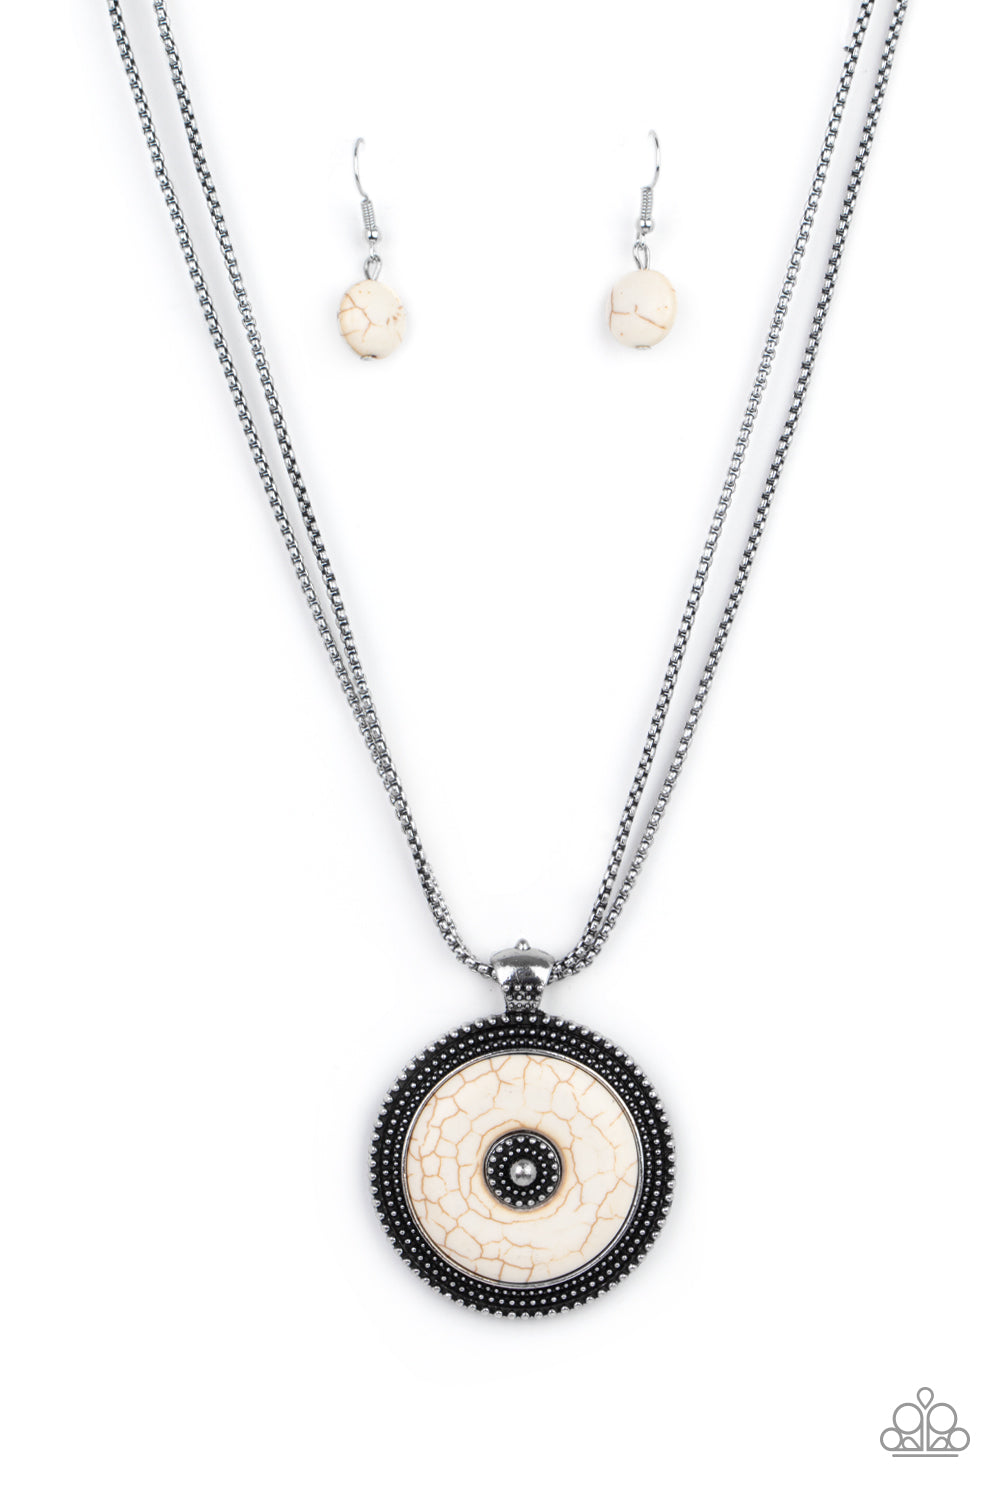  smooth white stone disc is pressed into a textured silver frame radiating with rings of silver studs